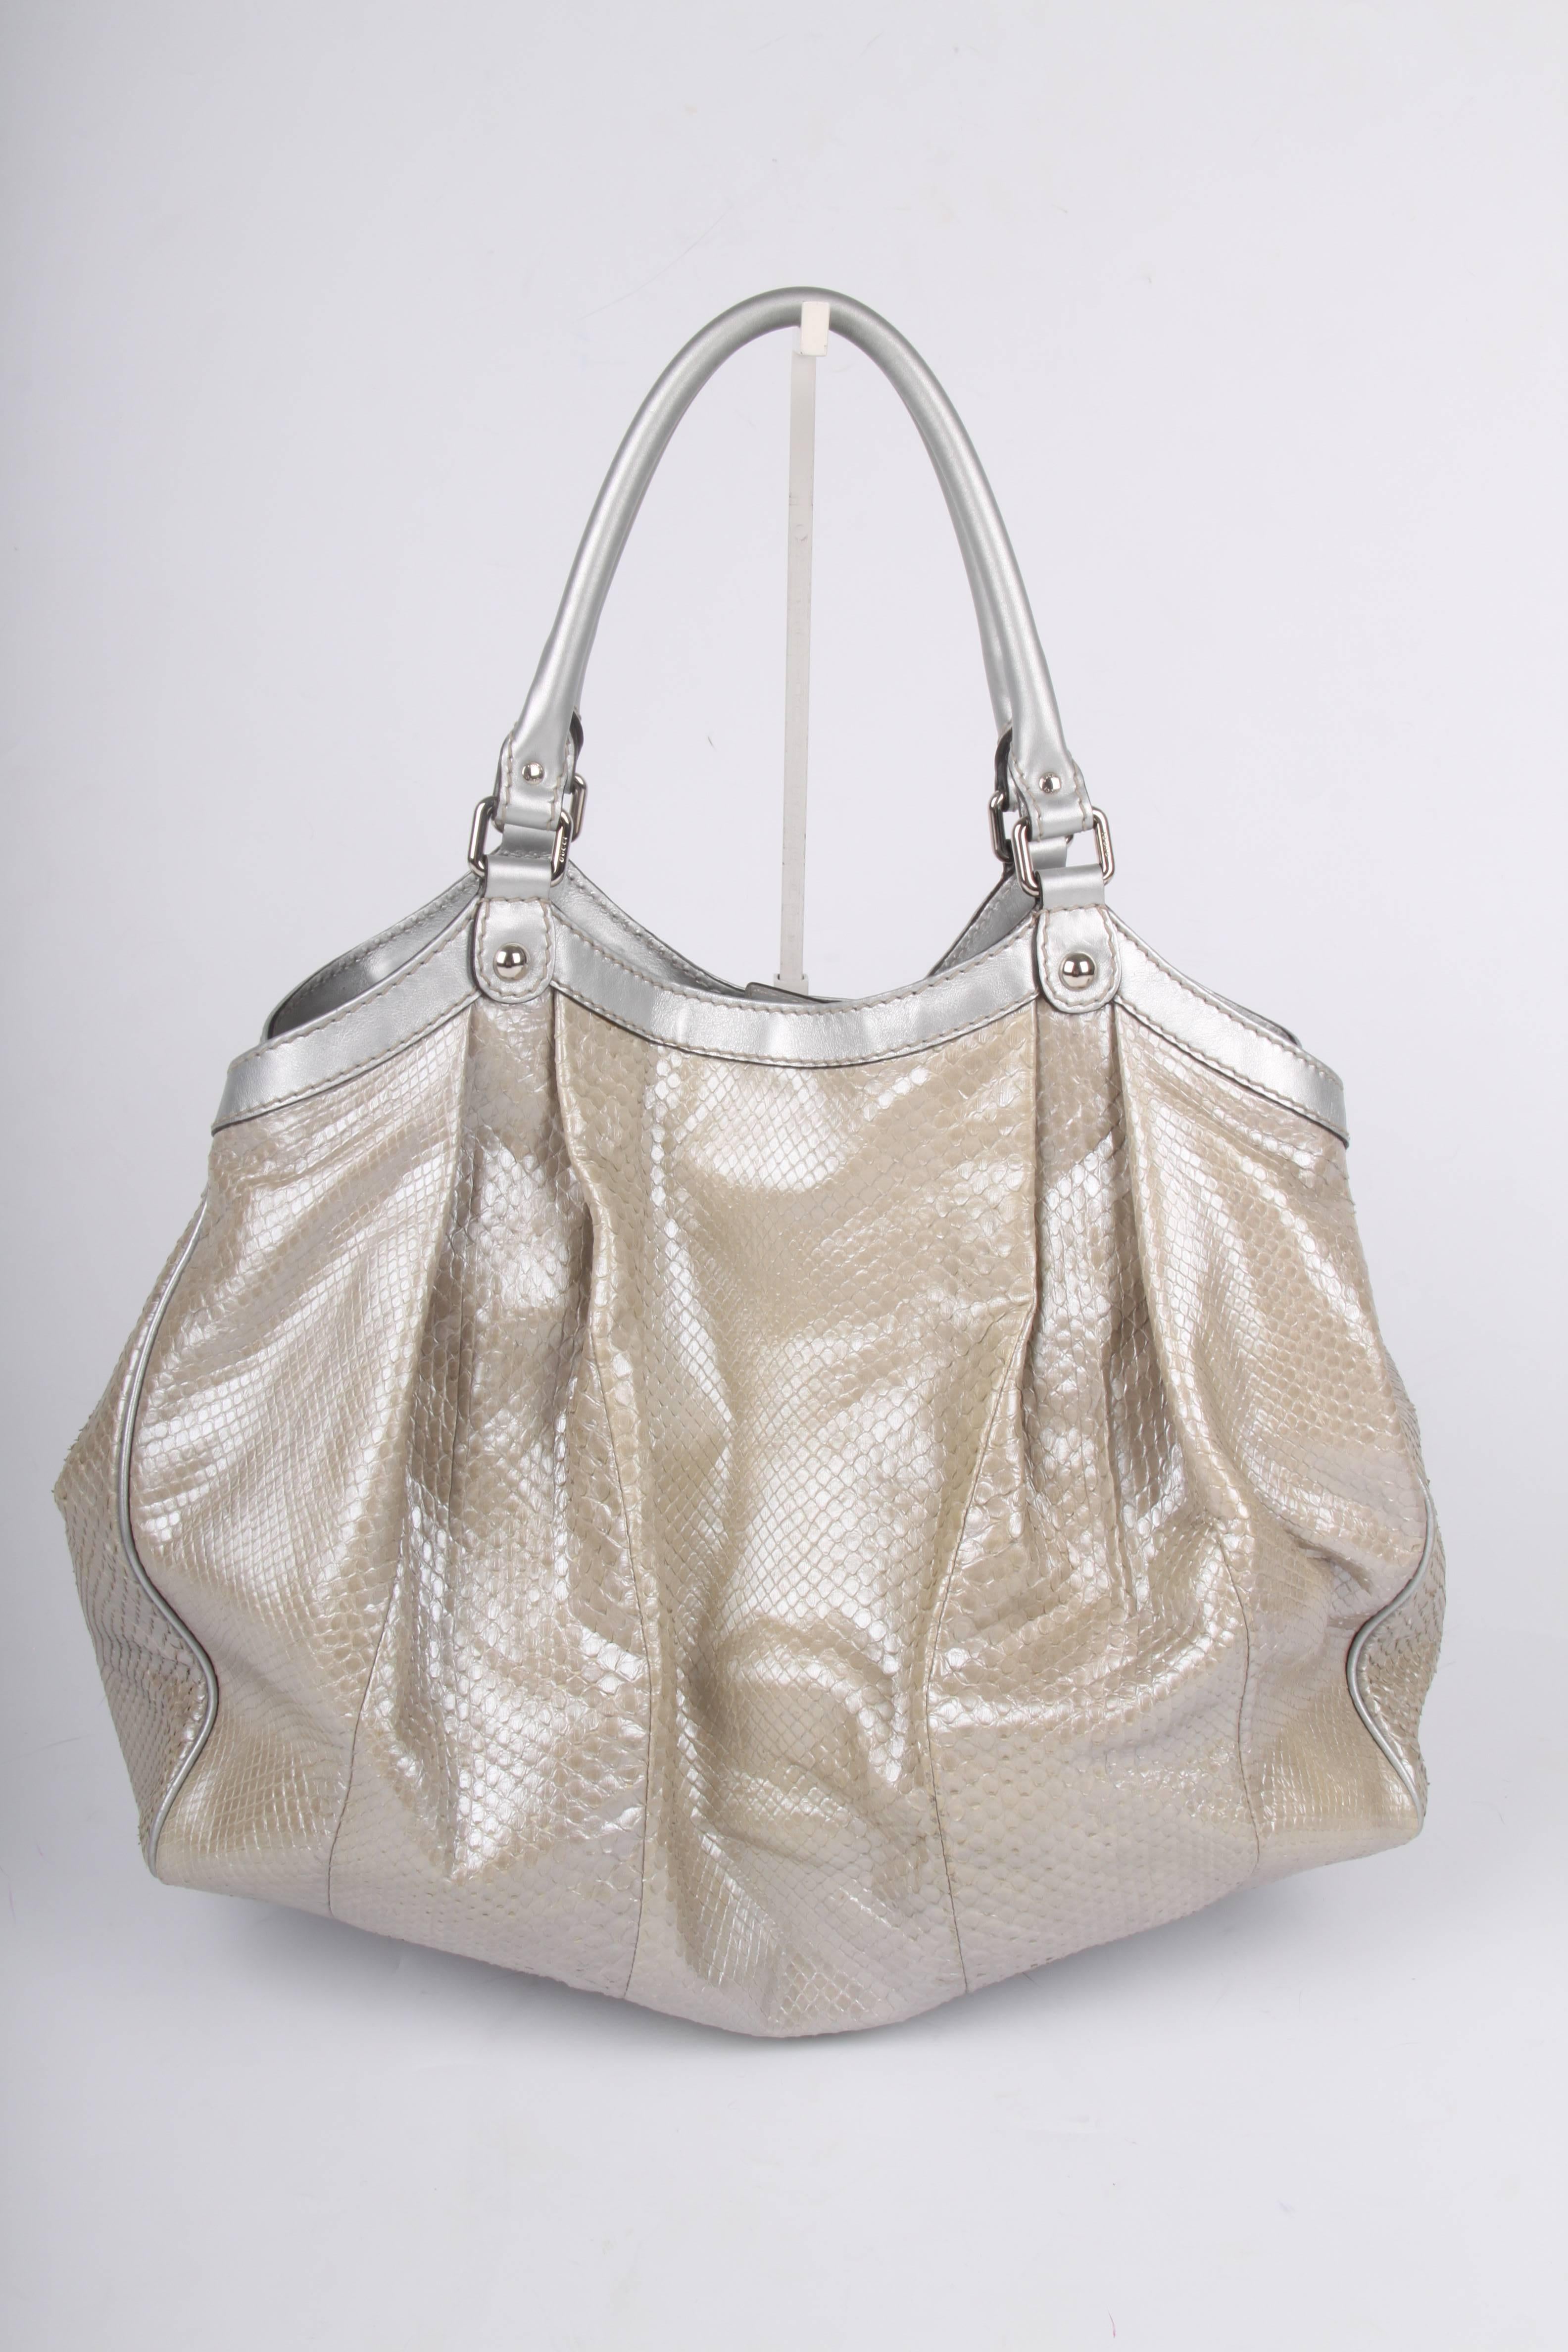 antastic Gucci Sukey Tote Bag crafted from silver-tone python leather.

Large sized bag in a sunny silver-tone color; we would take it with us to the beach right away. It will certainly fit al your belongings, it is a really huge bag.

Fully made of